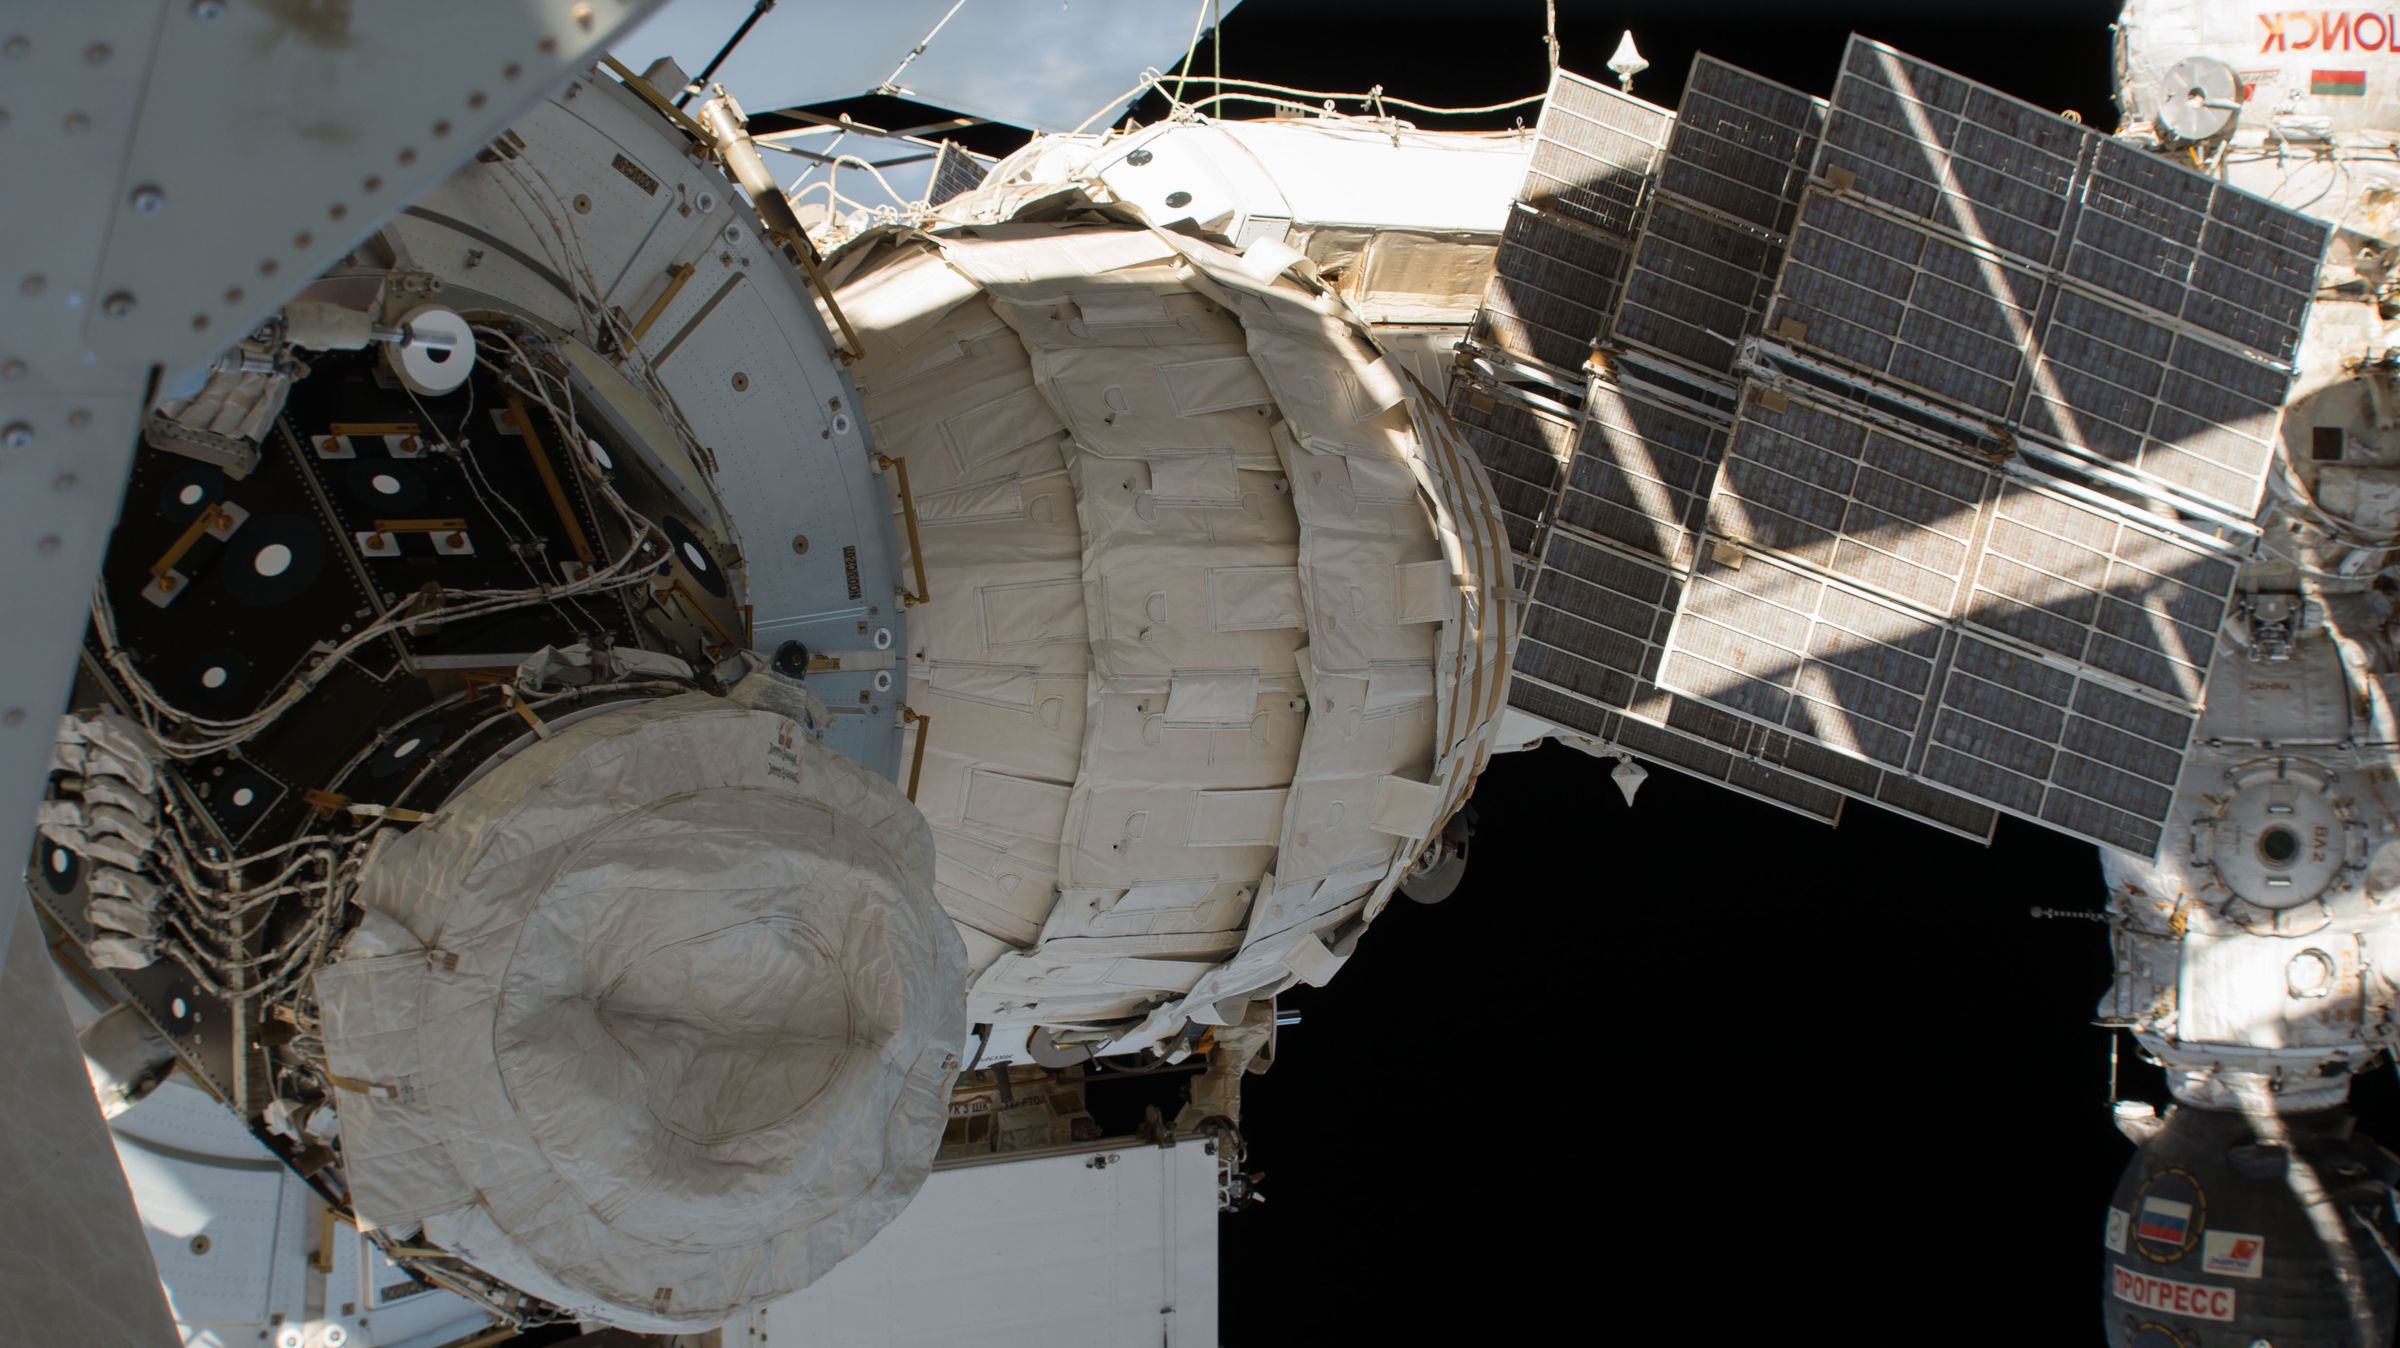 Bigelow Aerospace’s BEAM habitat module, attached to the International Space Station. Bigelow partnered with NASA to test out BEAM on the ISS, to see how well it held up in space.